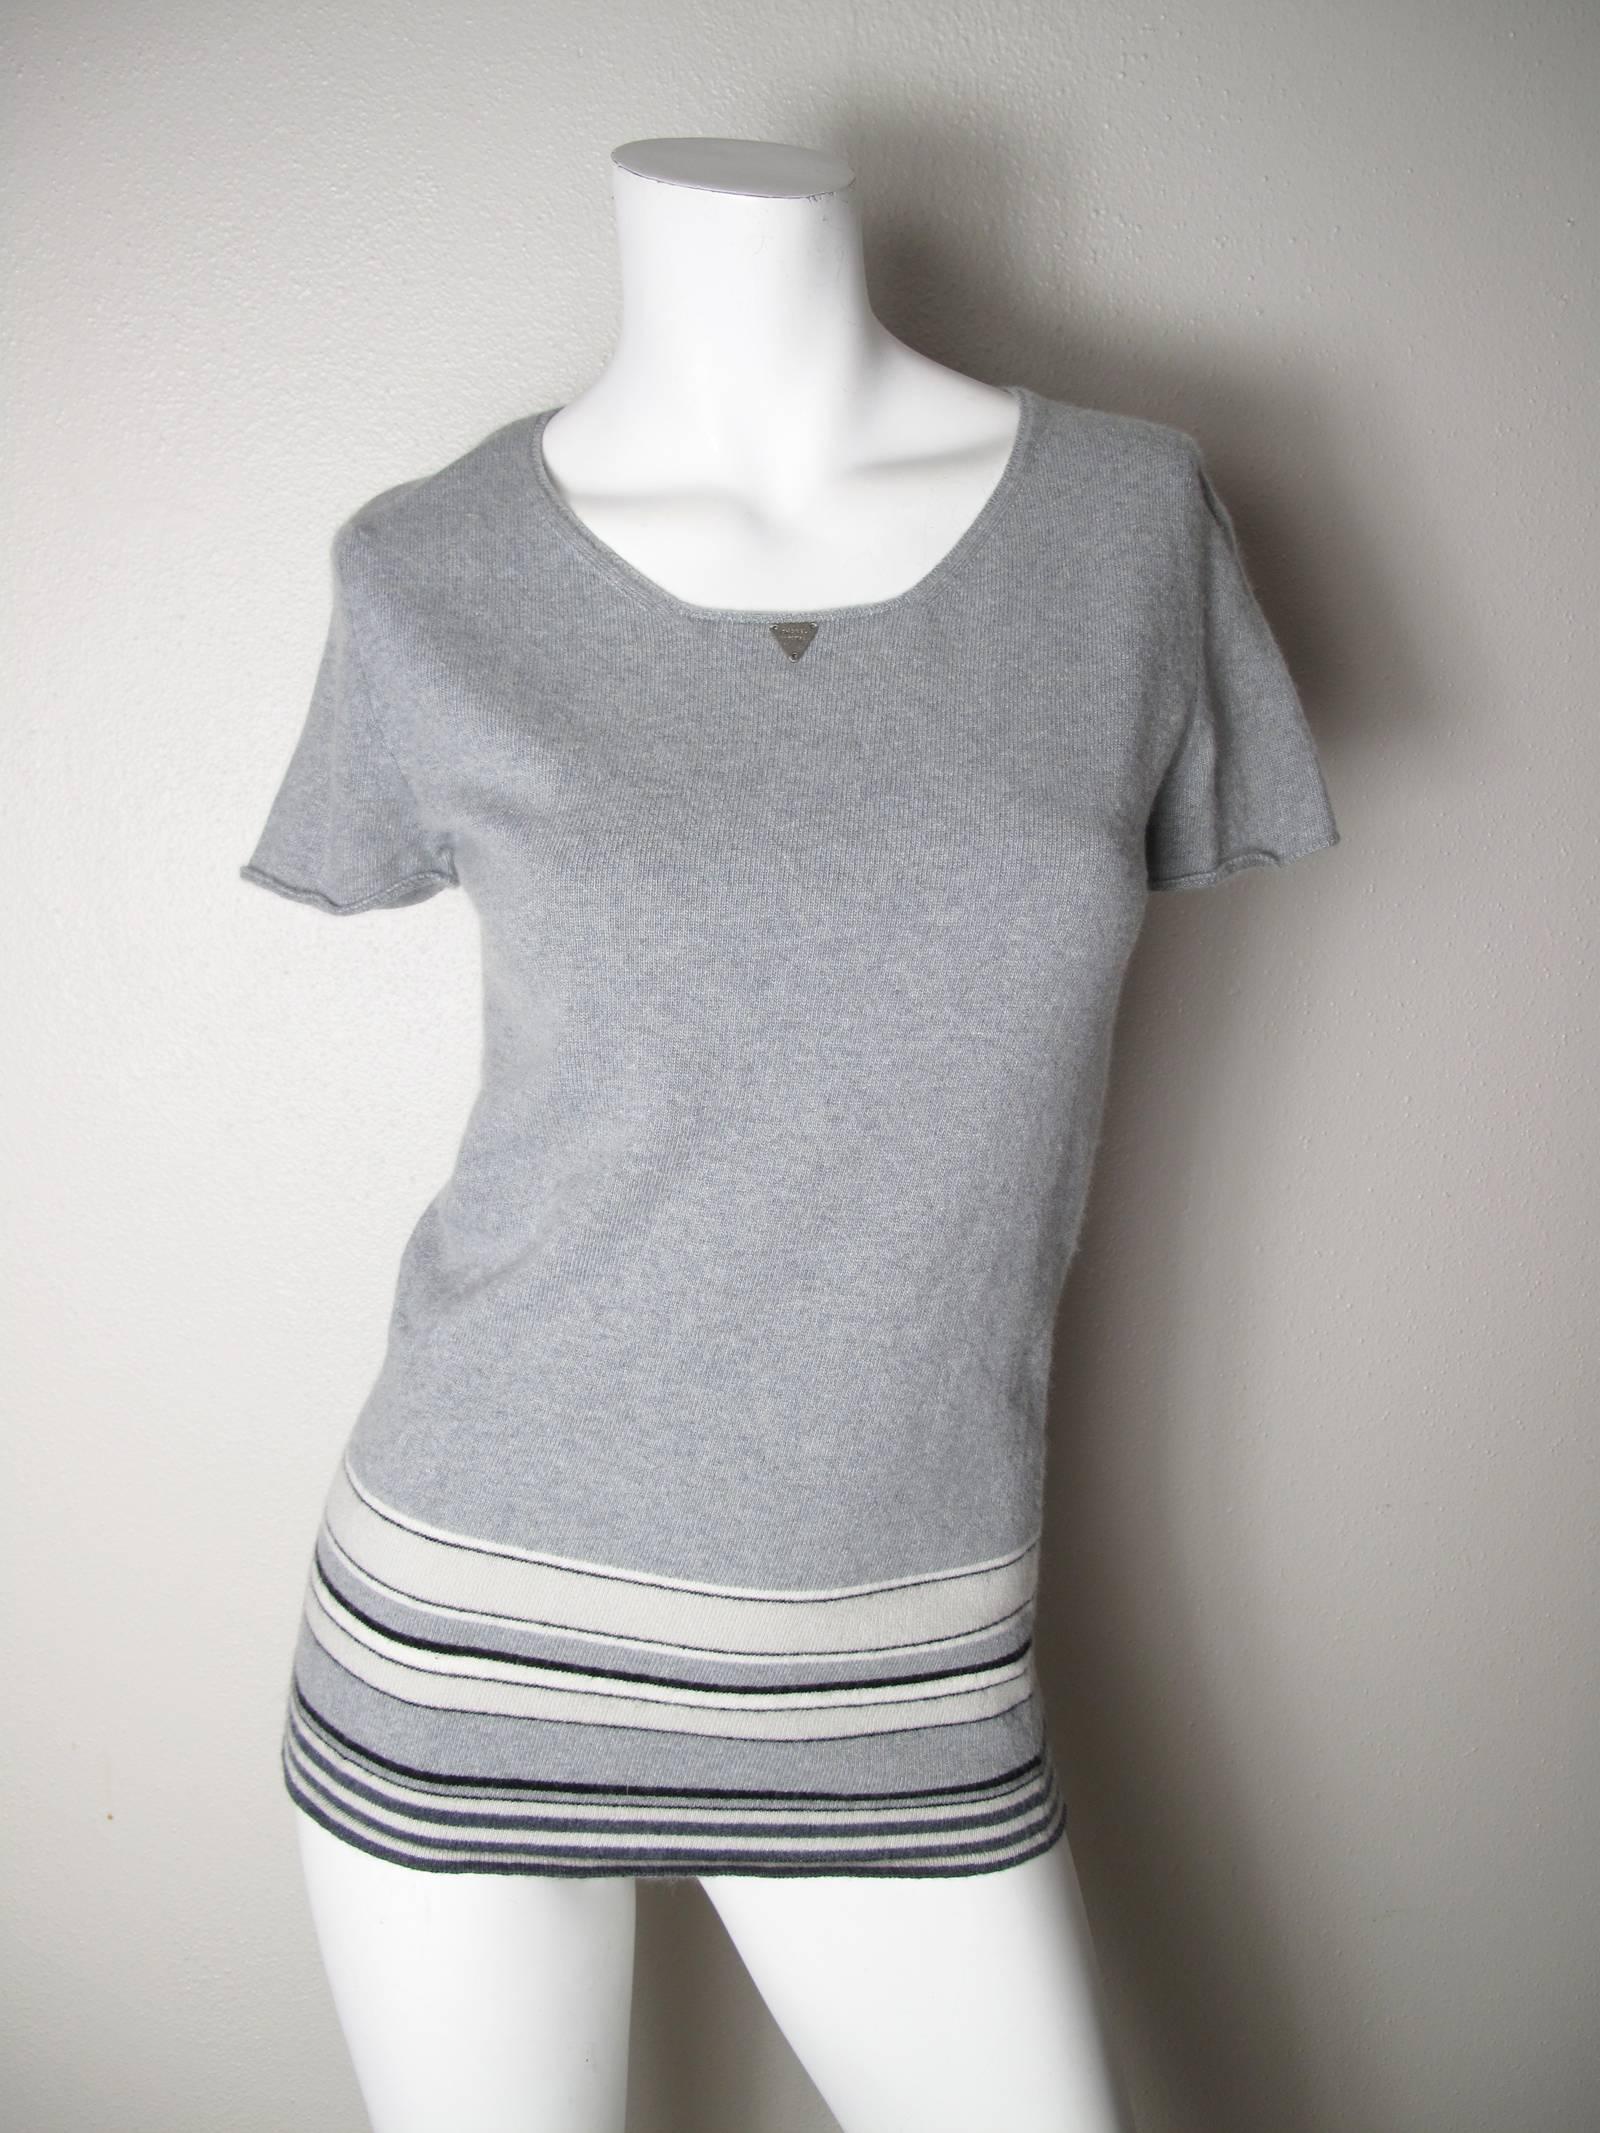 Chanel grey Cashmere twin set.  Condition: Very good, missing Chanel labels. Size 40

